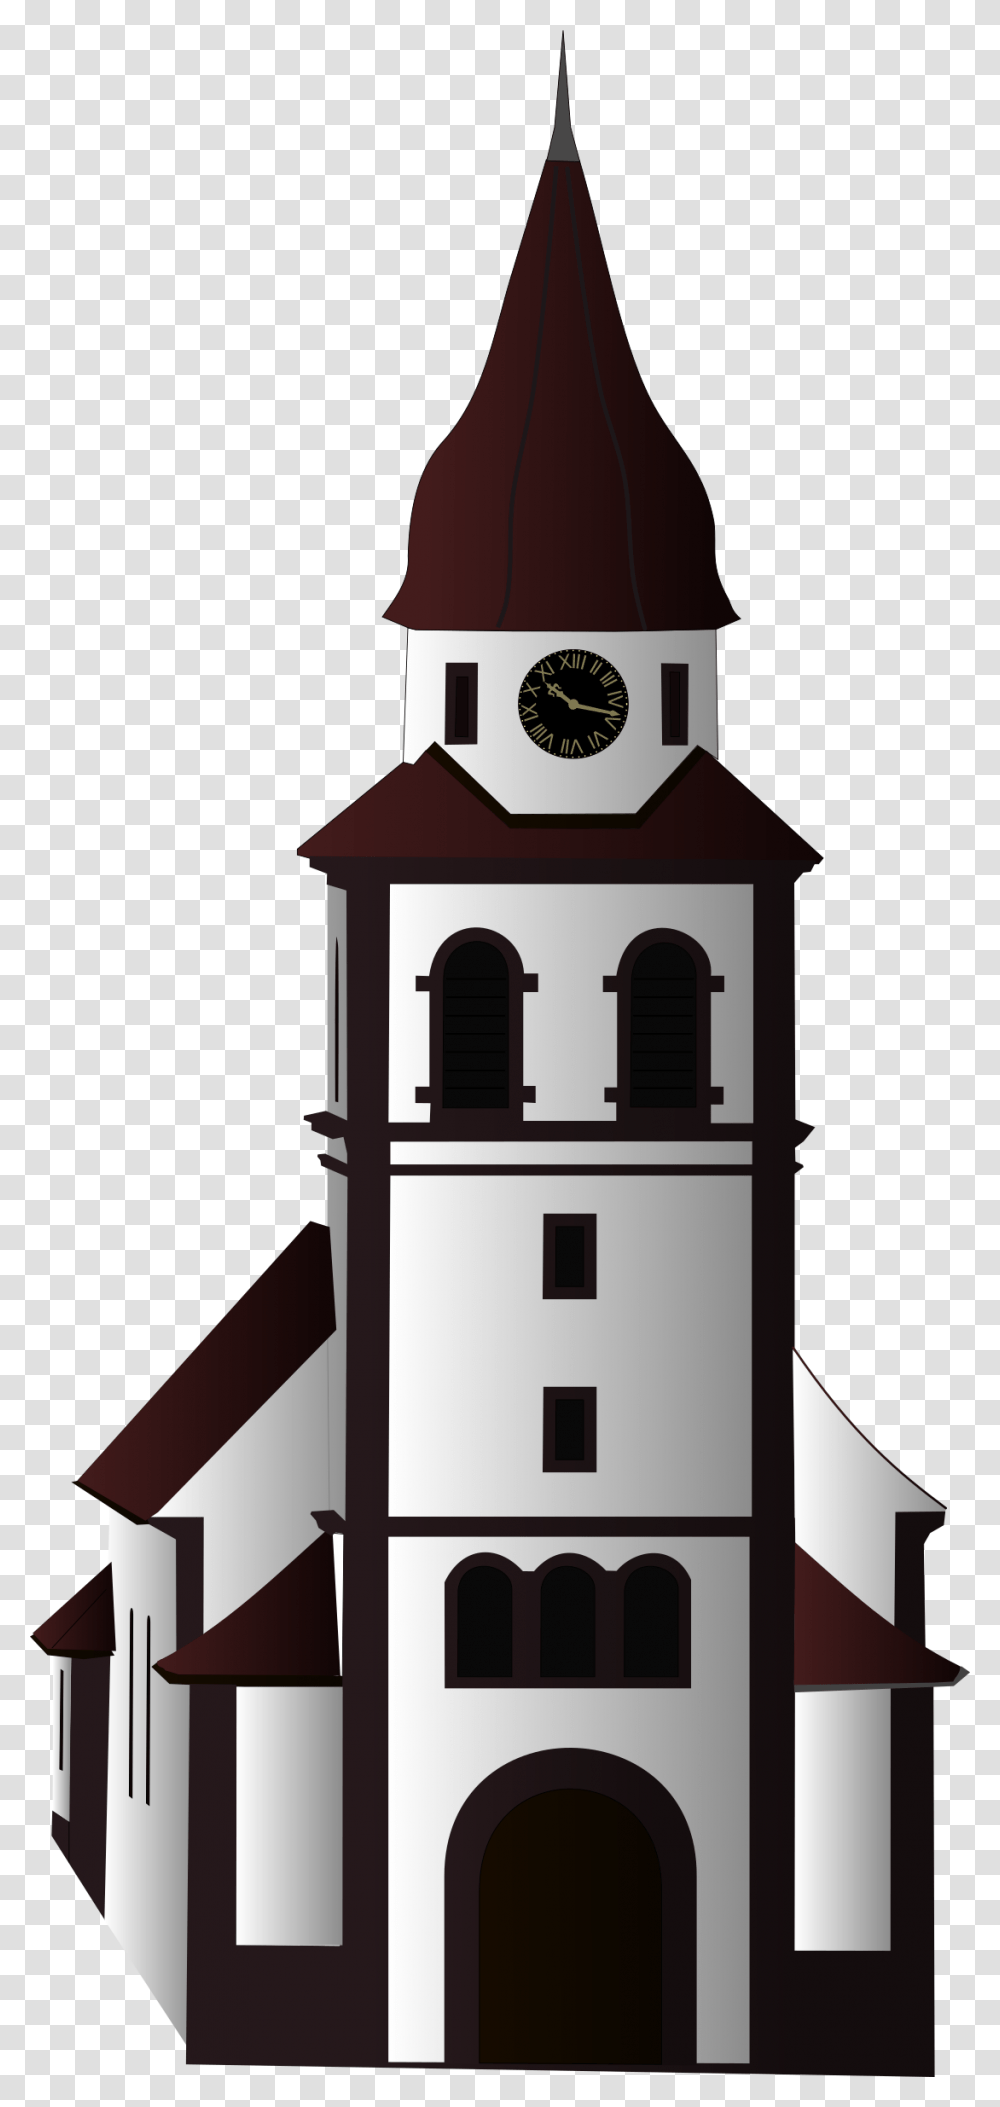 Photos V Church Tower, Architecture, Building, Bell Tower, Clock Tower Transparent Png